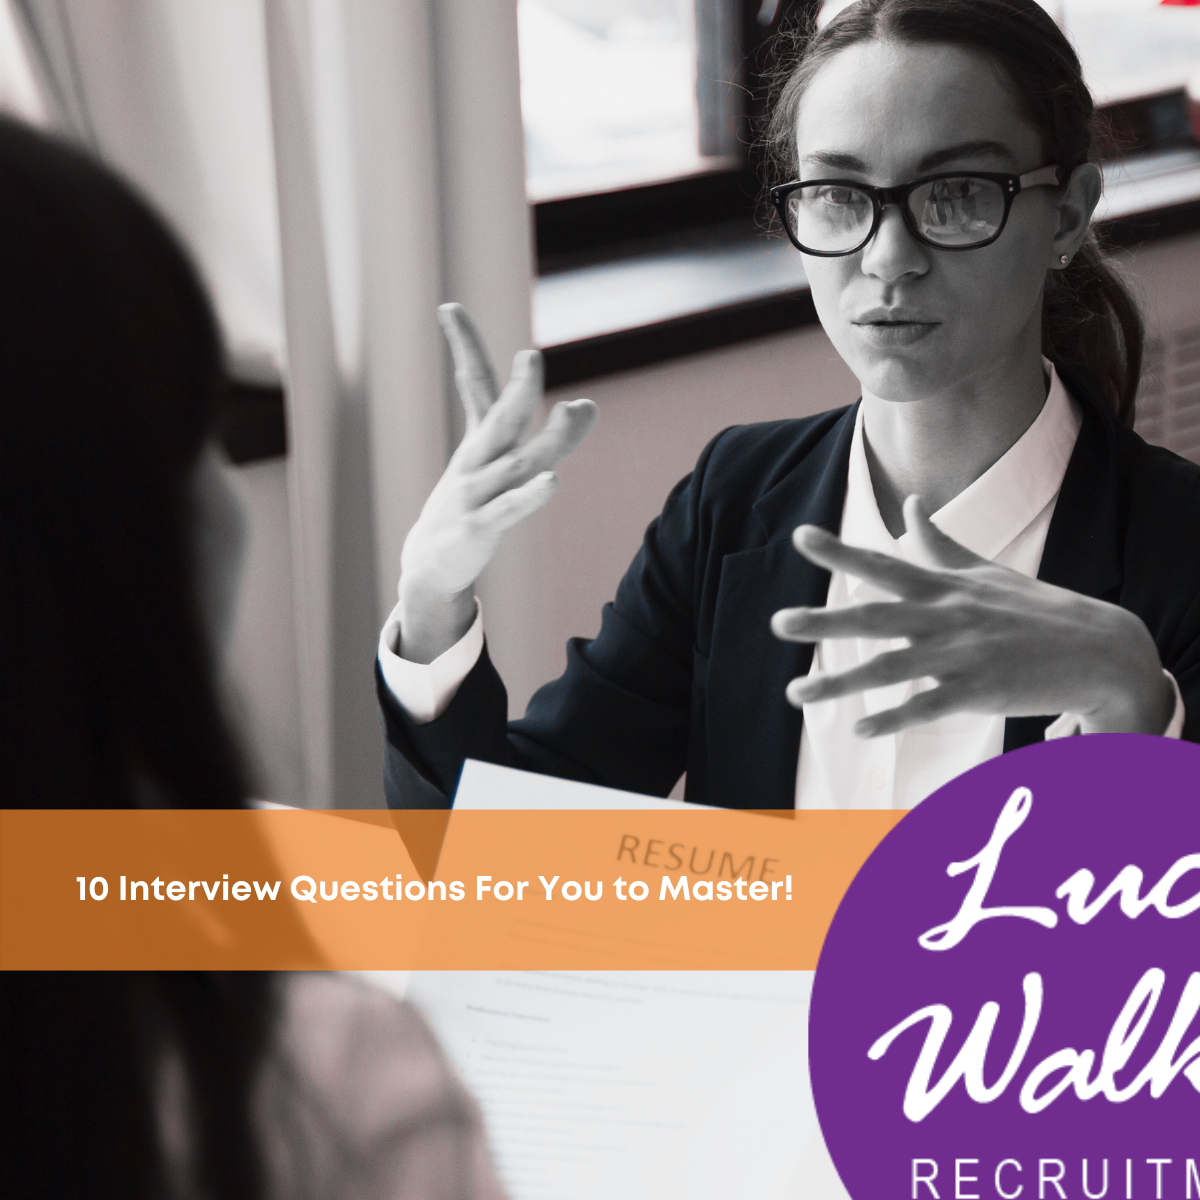 10 Interview Questions for You to Master.